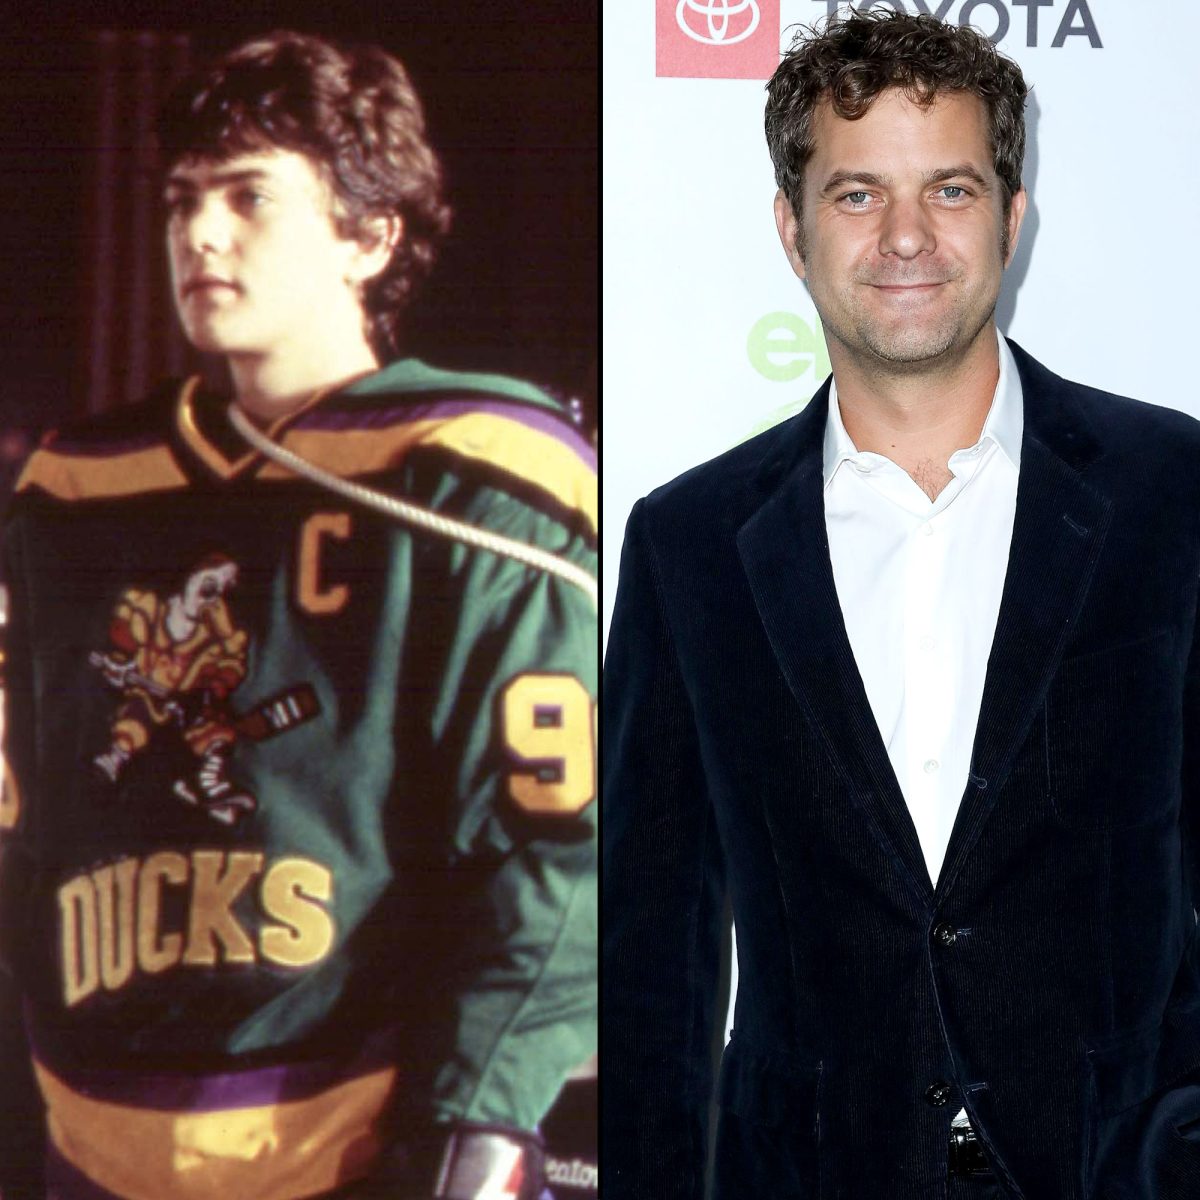 Mighty Ducks: Where are the stars of the movie trilogy? - NZ Herald